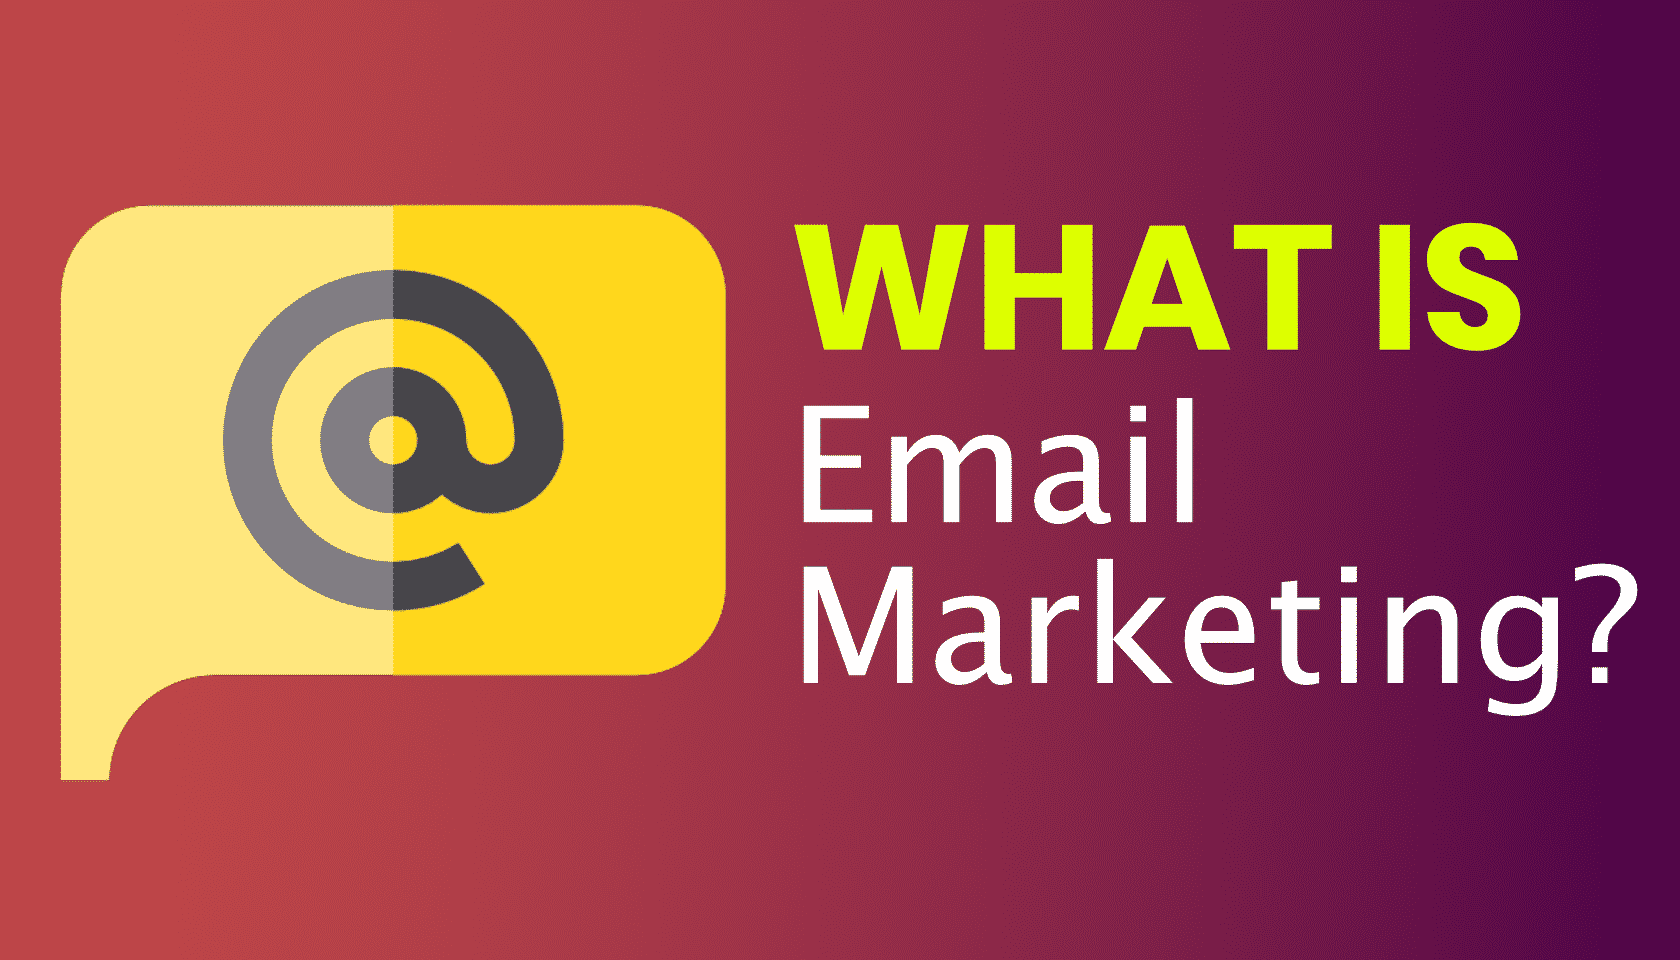 What is: Email Marketing